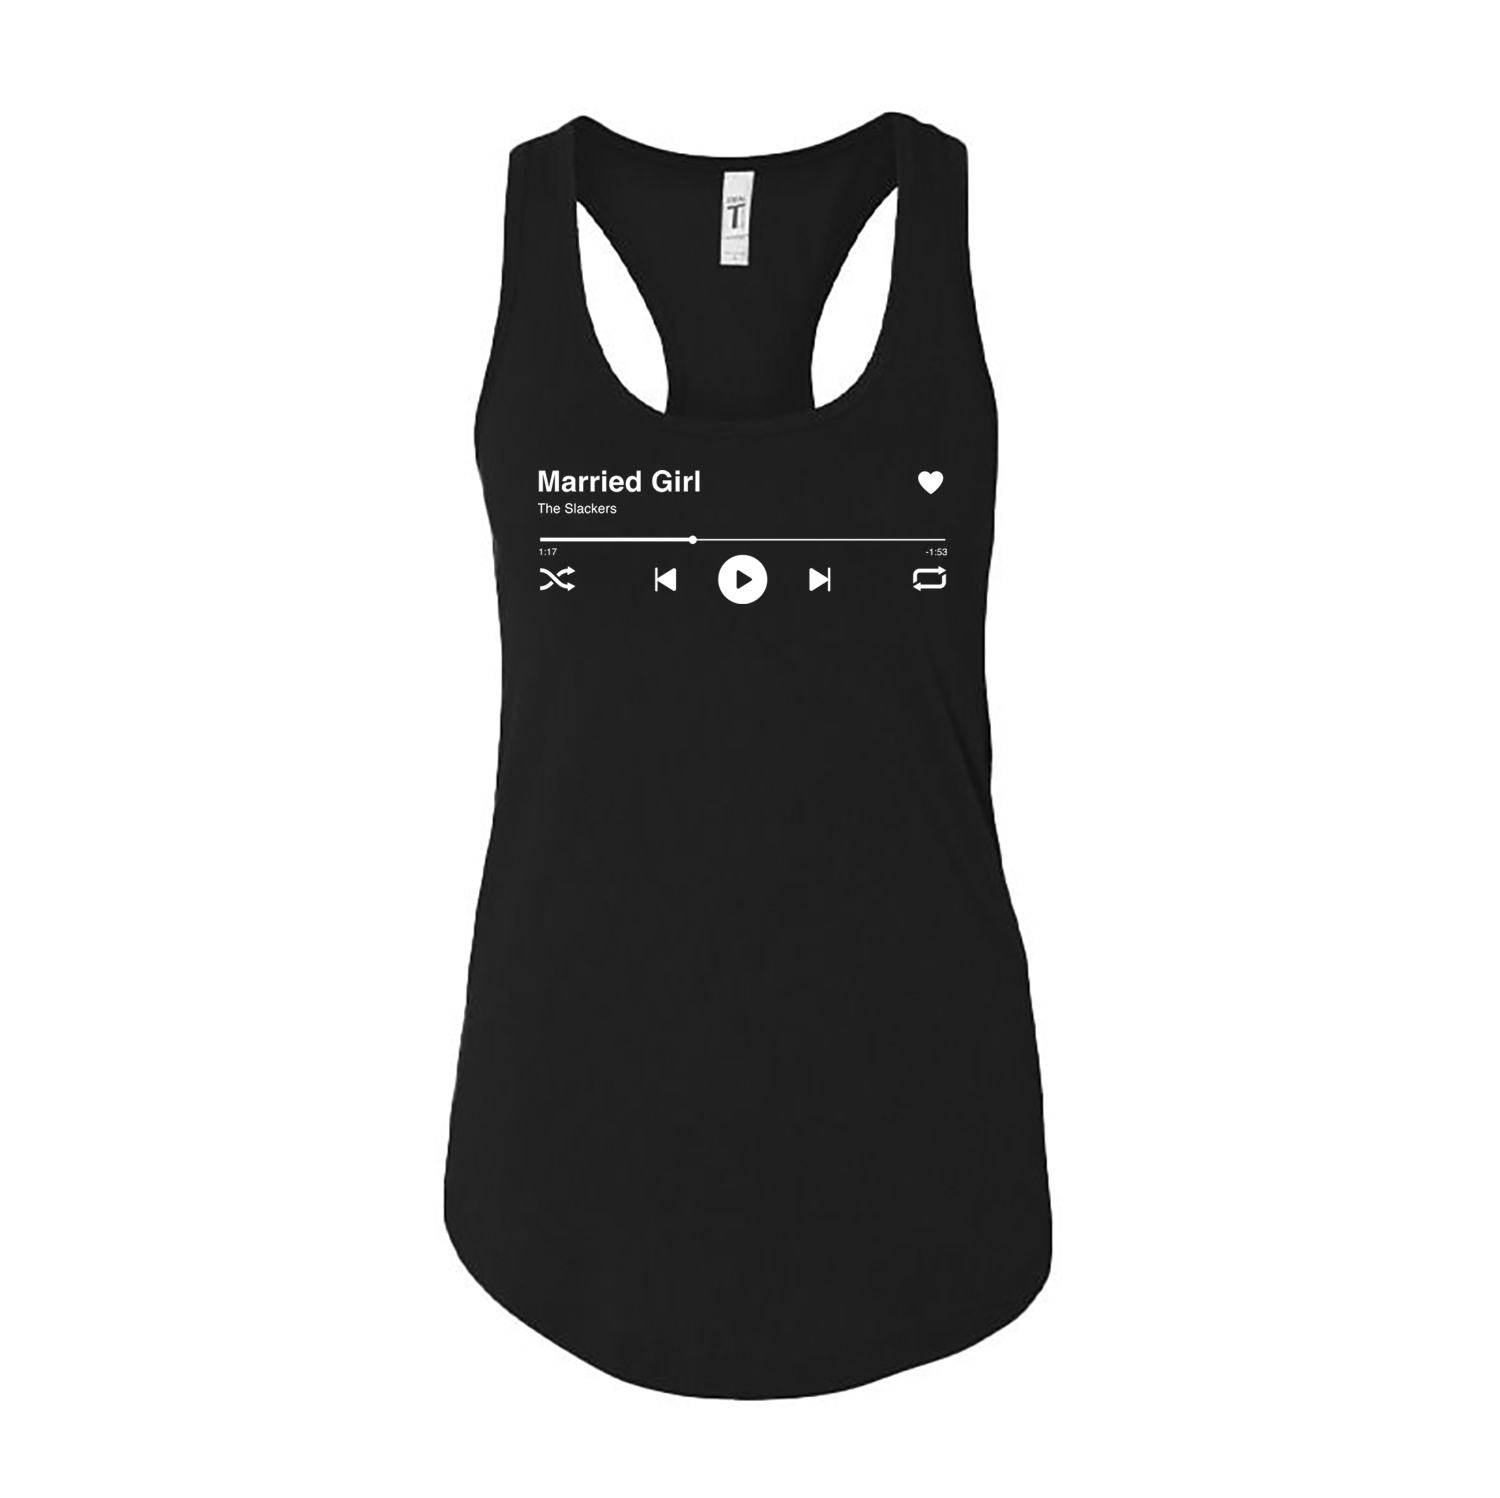 Married Girl Tank Top Sizes S - 2XL